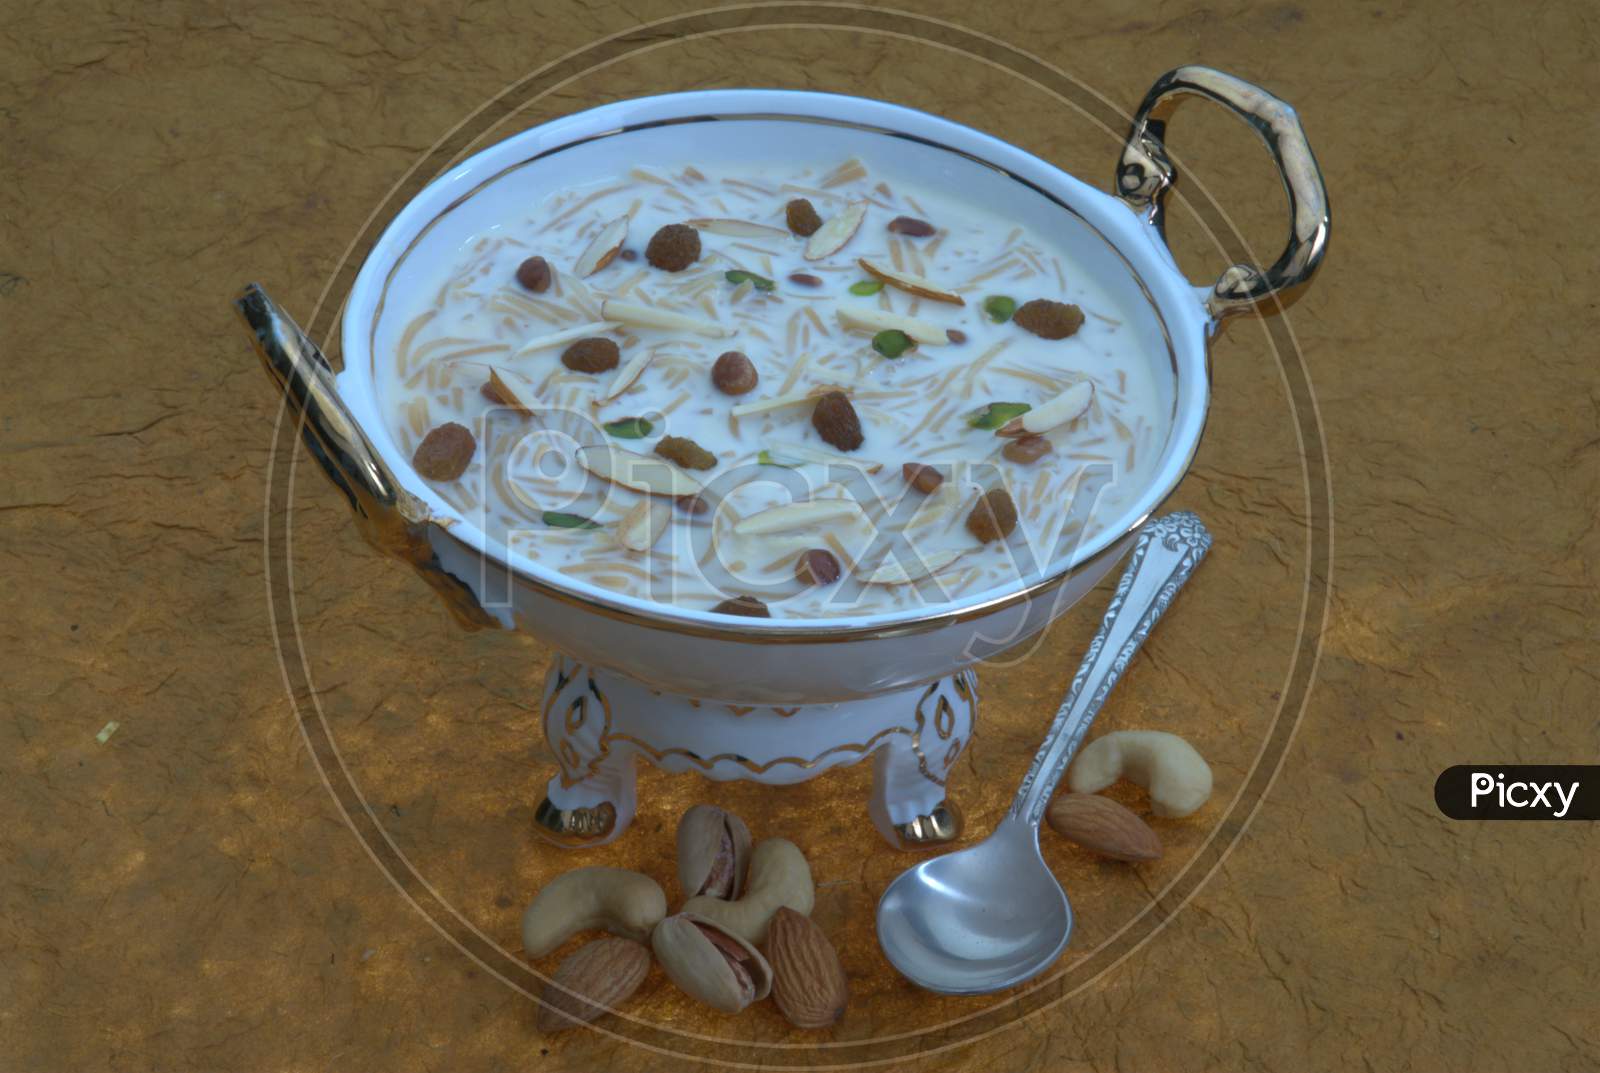 Indian Sweet Savory Kheer Or Payasam Served In a Bowl